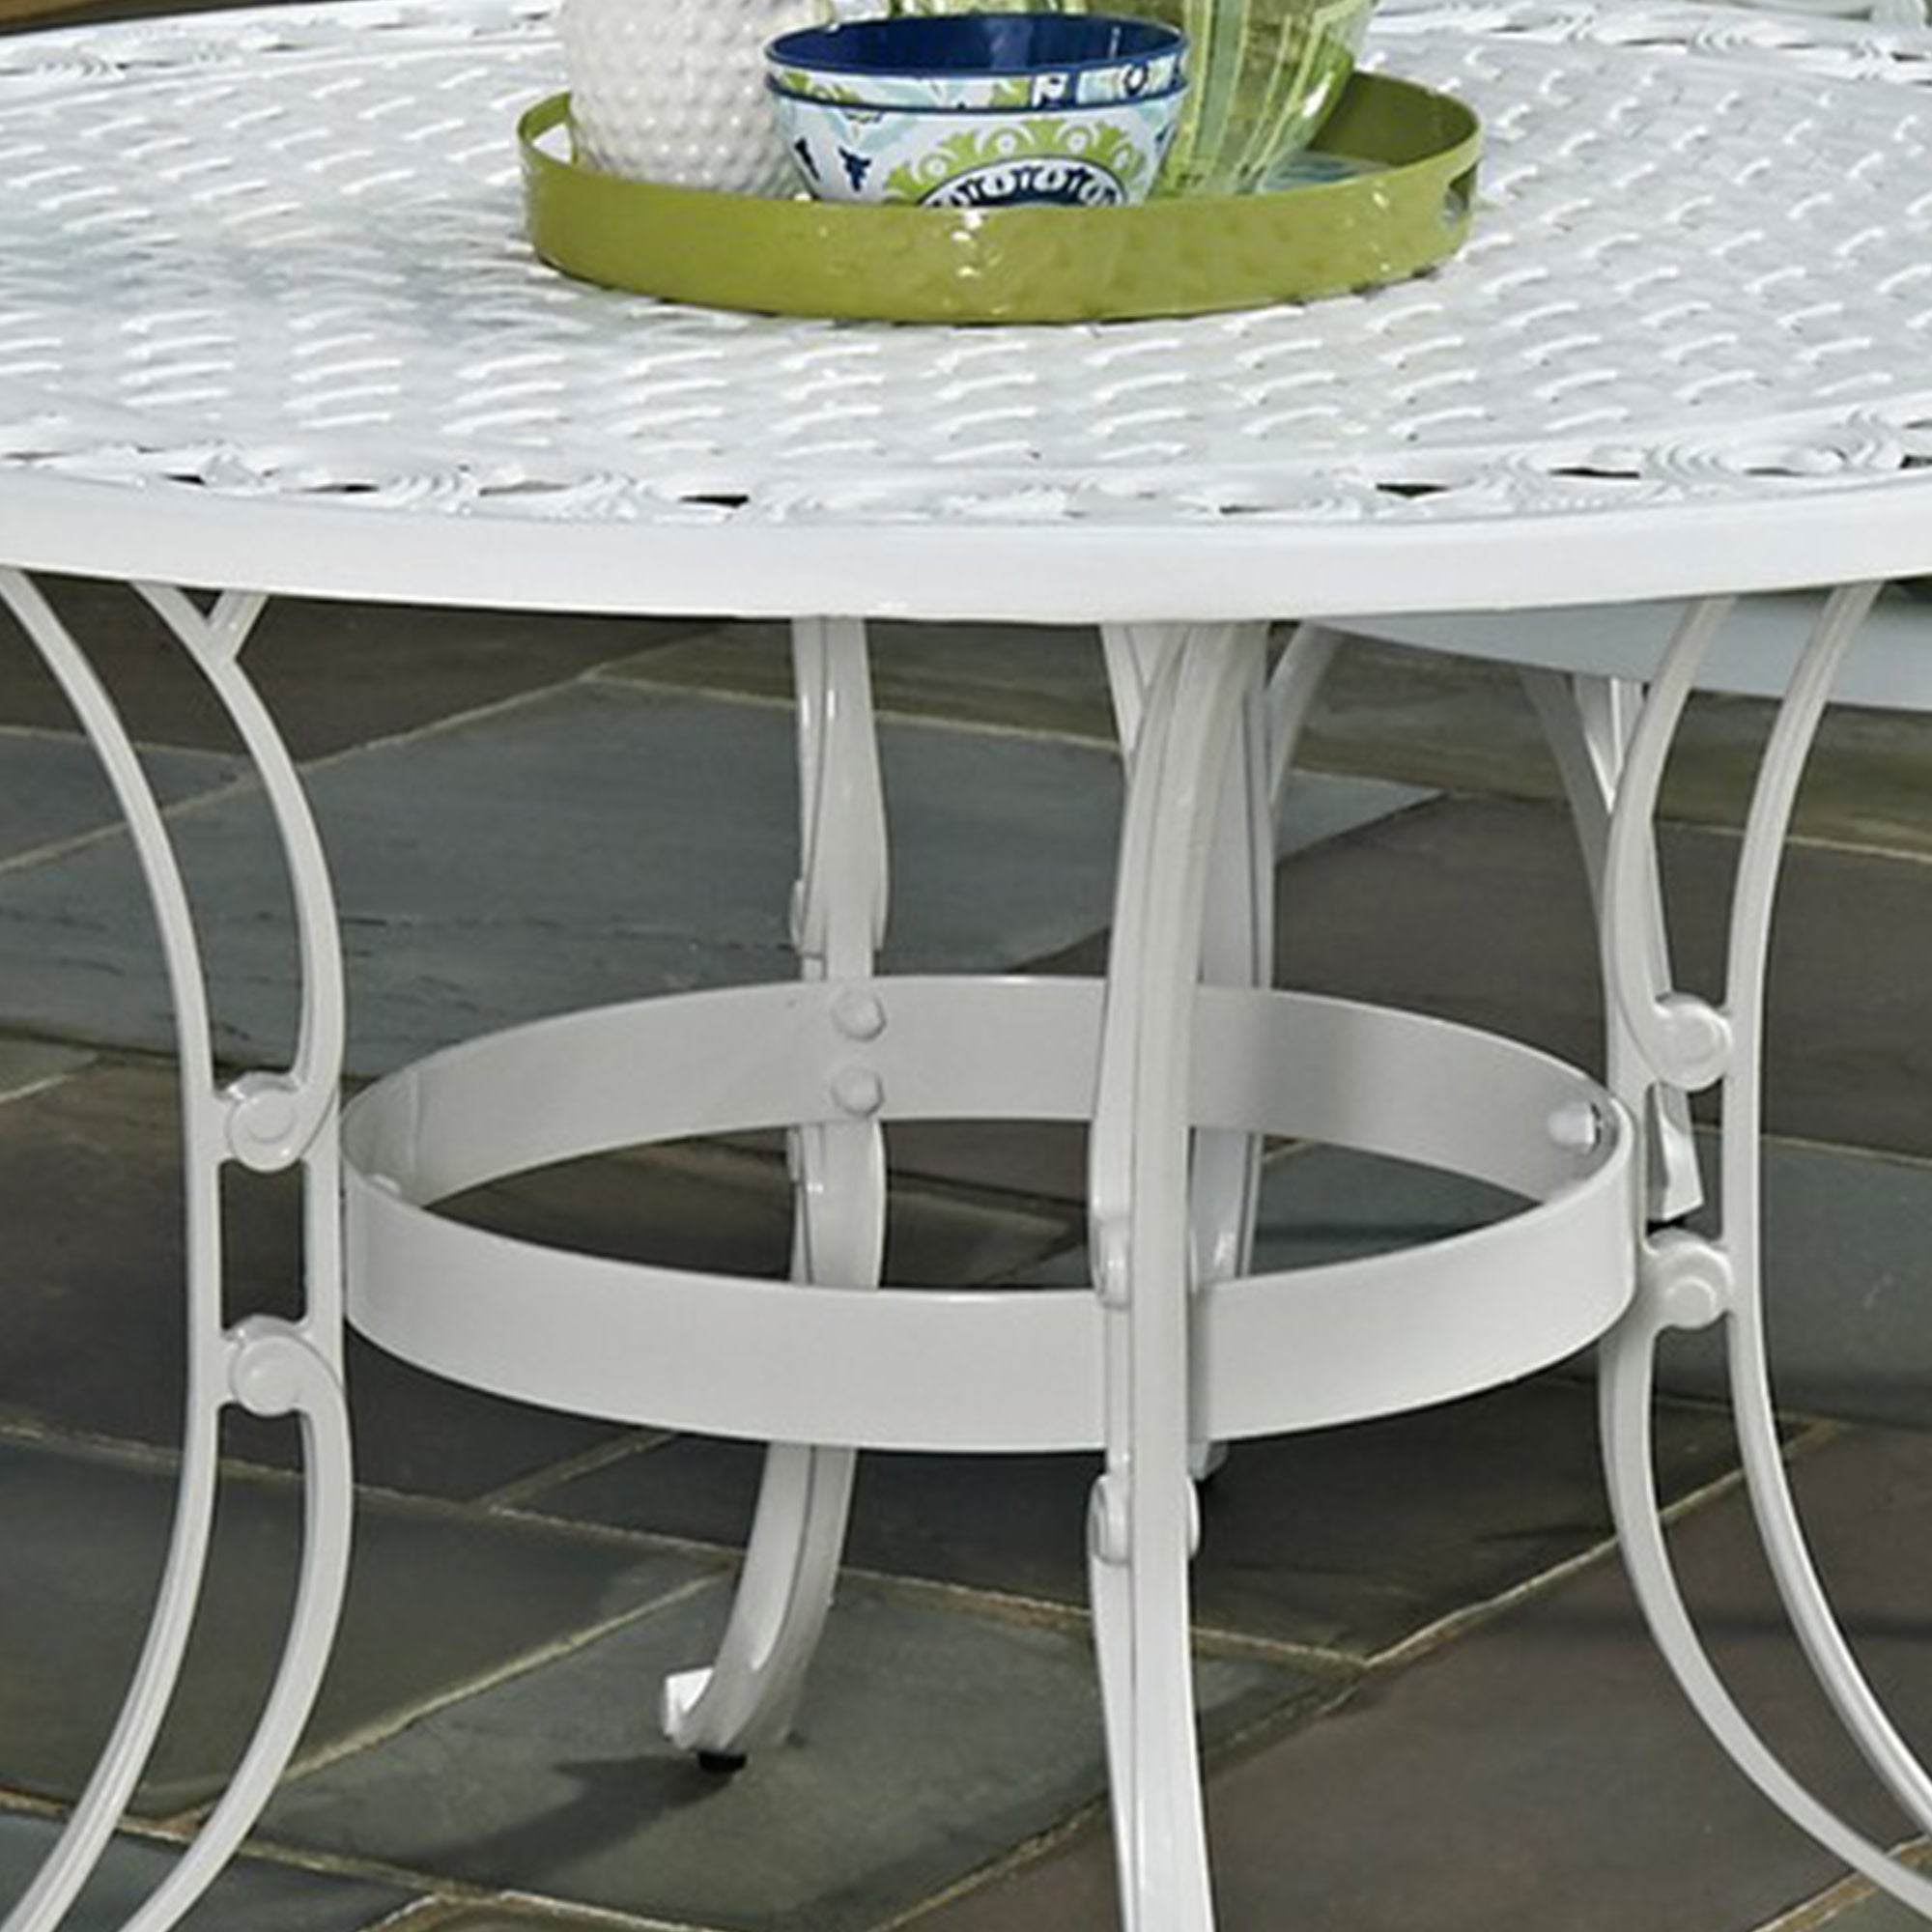 Sanibel Outdoor Dining Table by Homestyles - White - Aluminum - 6652-30